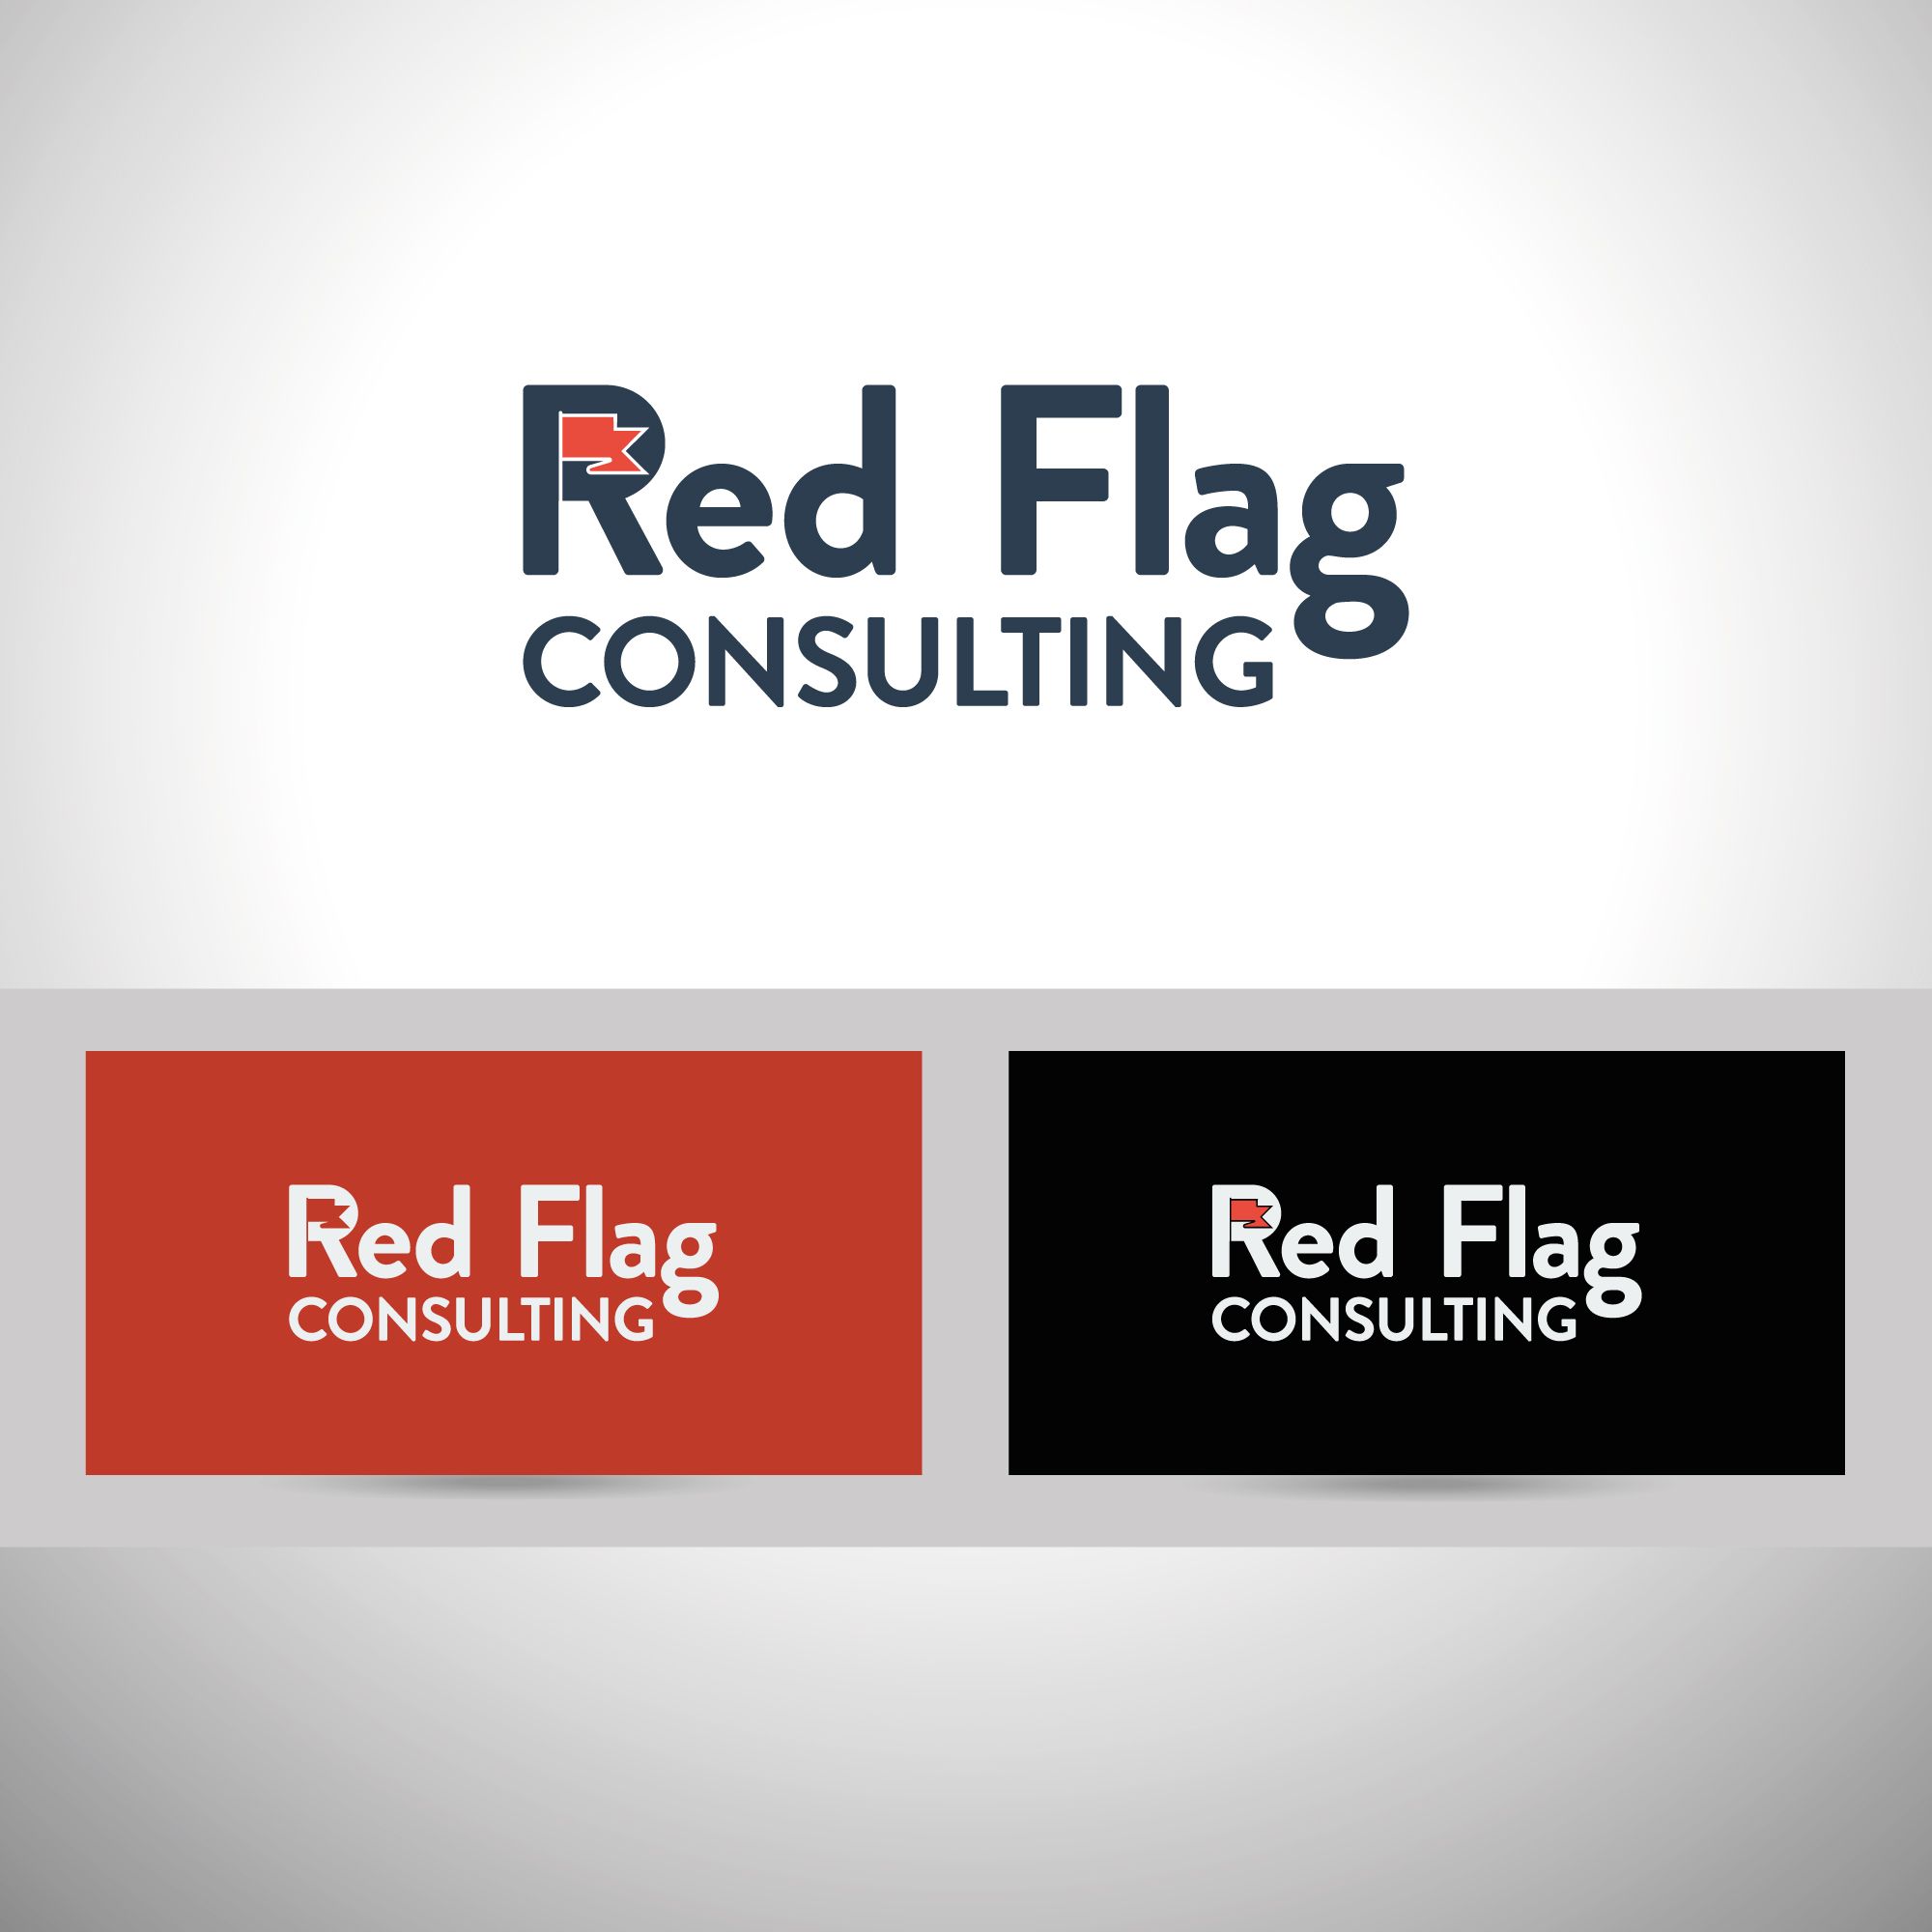 Red Flag Consulting - дизайнер Gas-Min